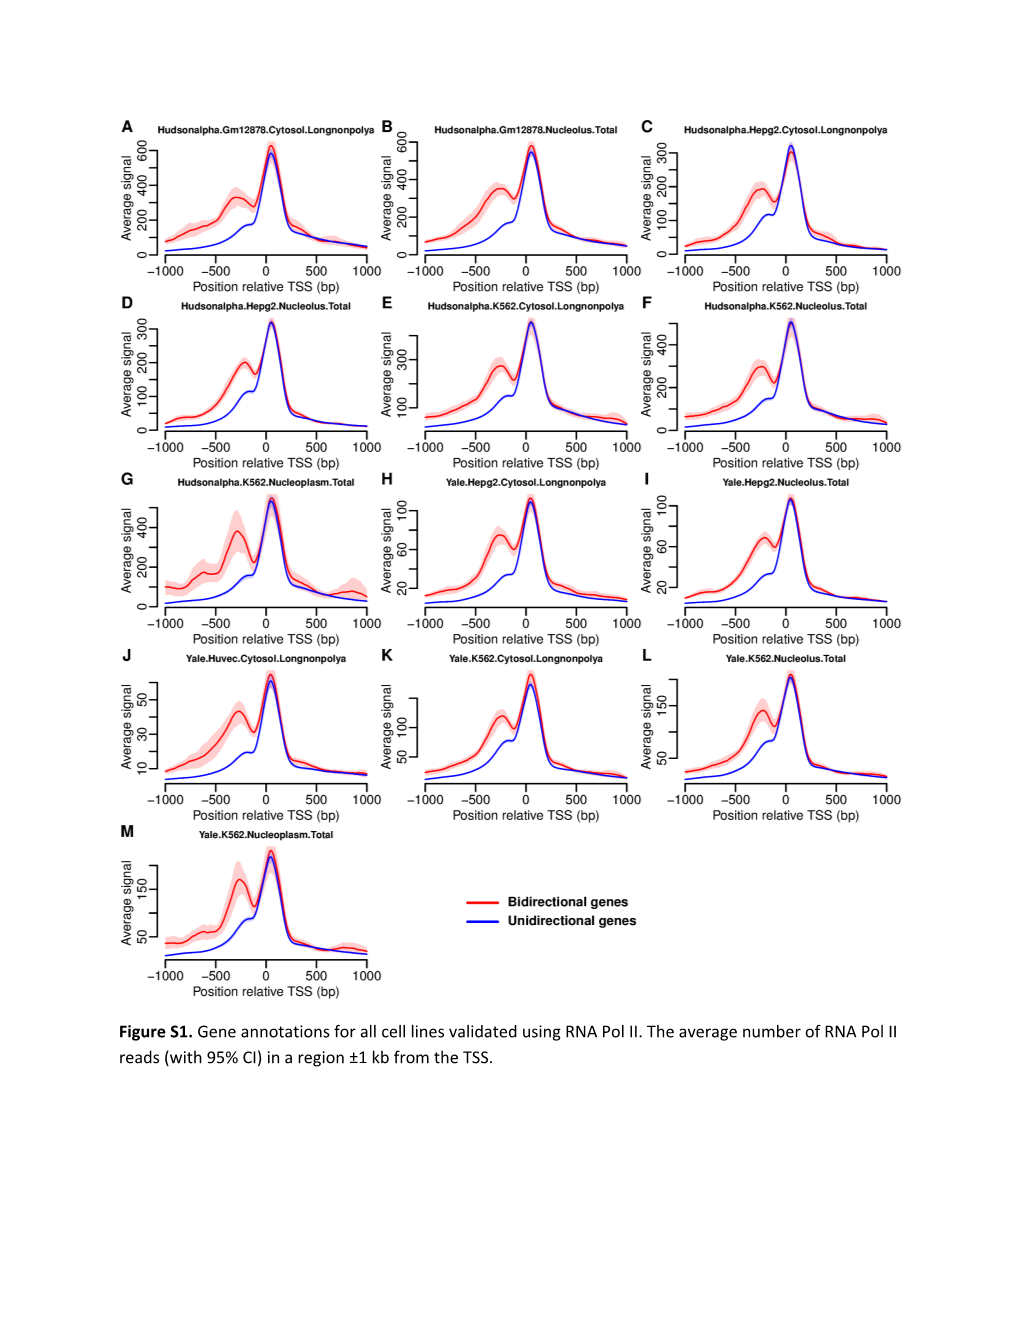 Figure S1. Gene Annotations for All Cell Lines Validated Using RNA Pol II. the Average